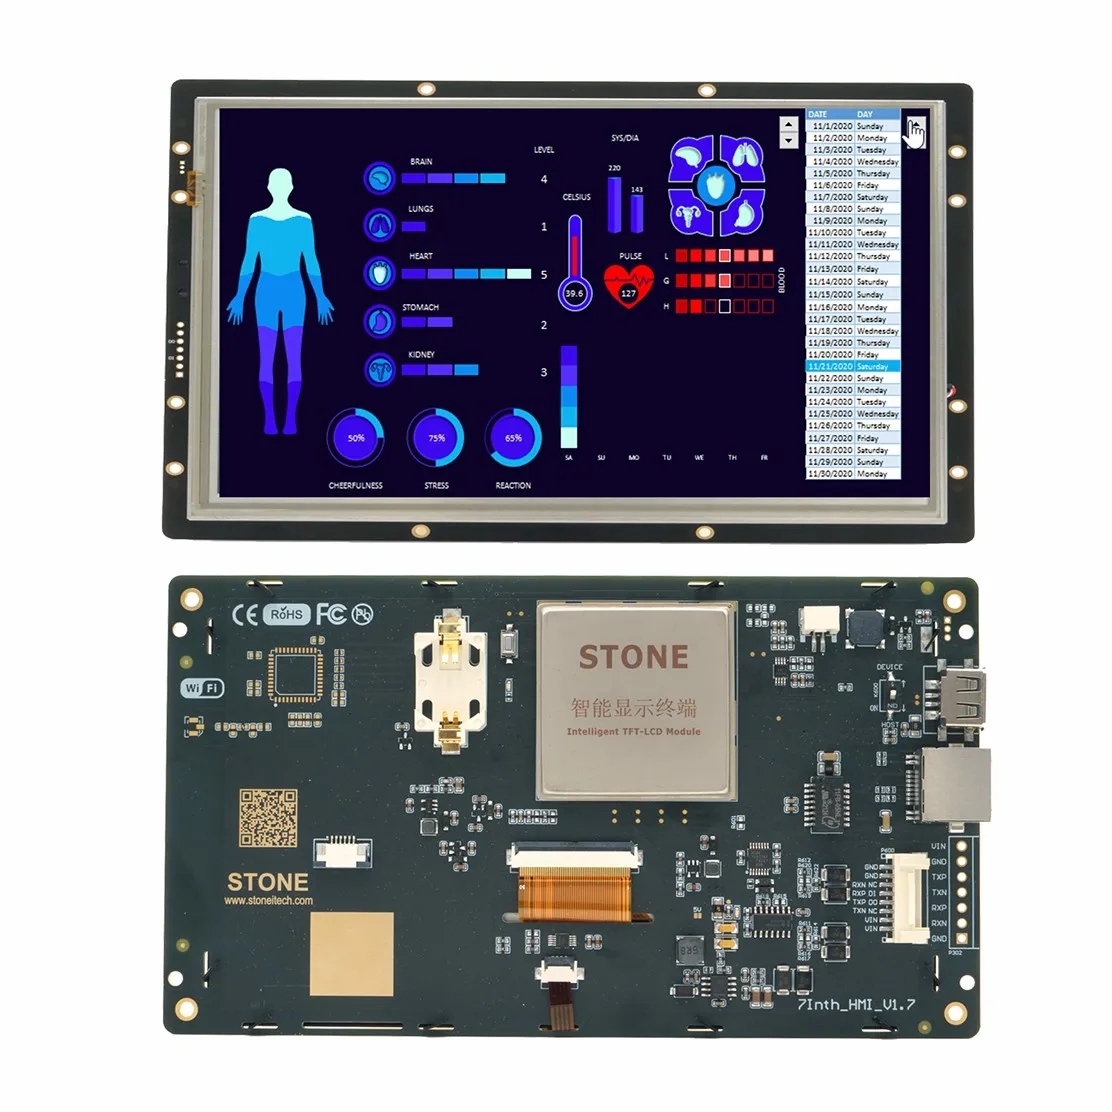 SCBRHMI 7.0 Inch LCD-TFT HMI Display Module Intelligent Series RGB 65K Color Resistive Touch Panel without Enclosure